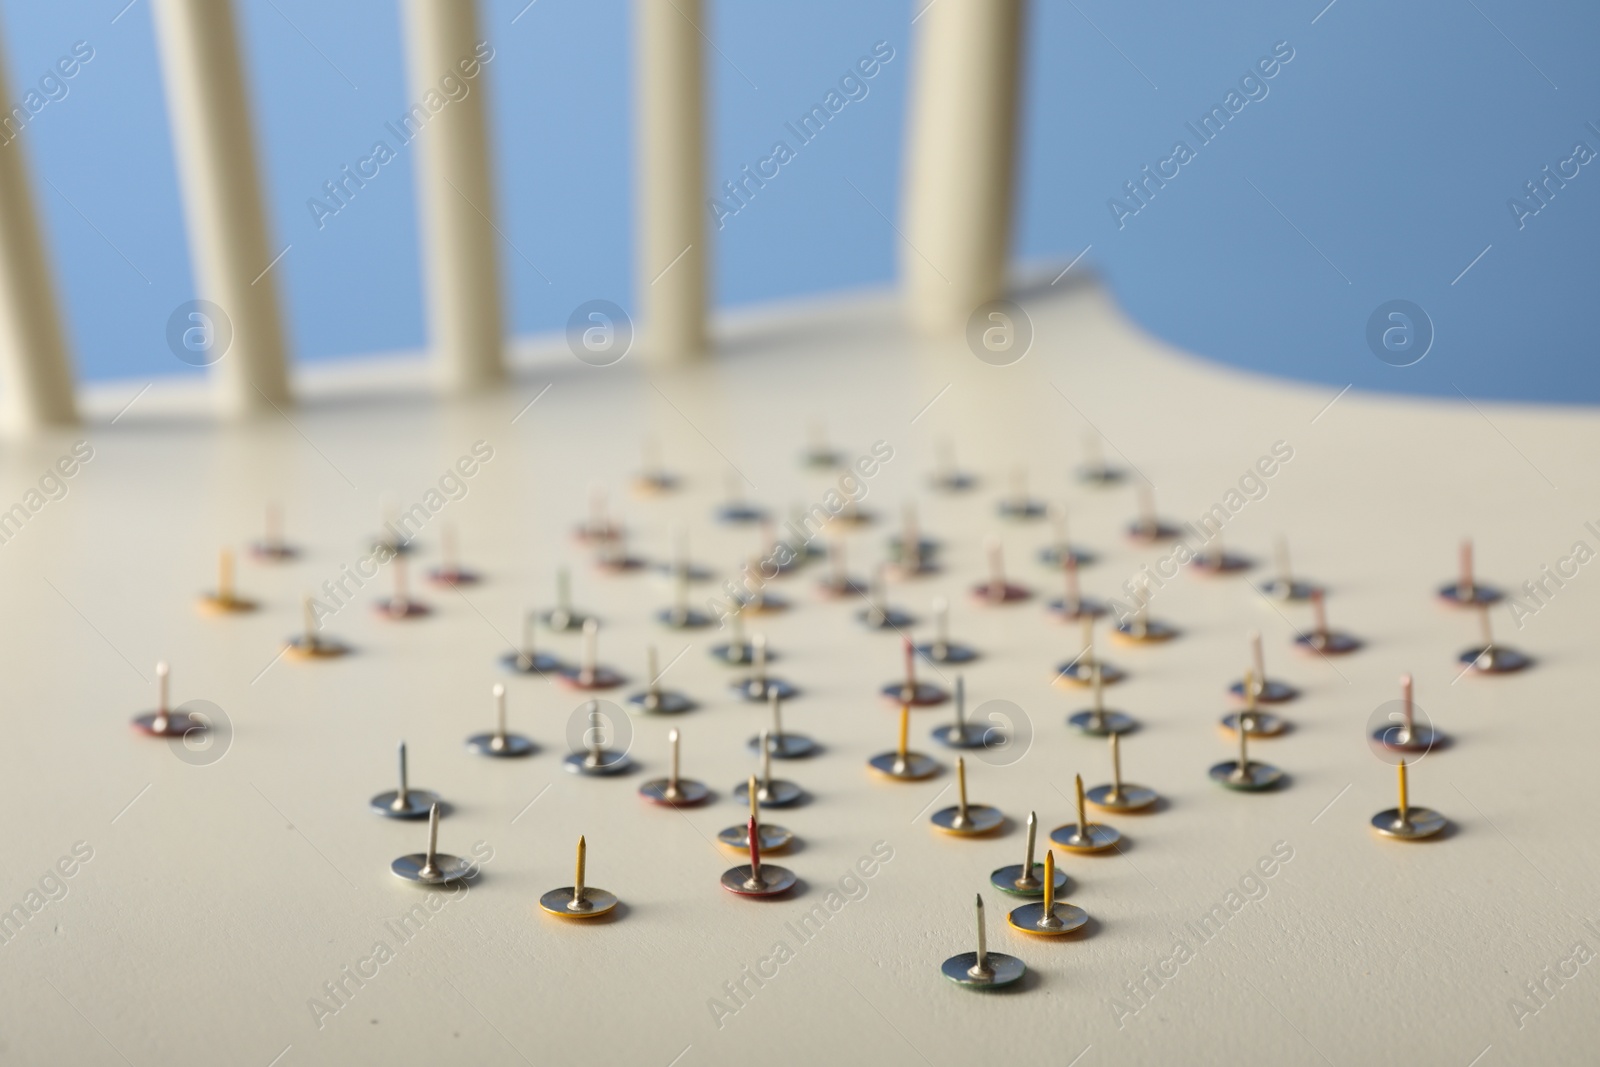 Photo of Chair with pins on blue background, closeup. April fool's day